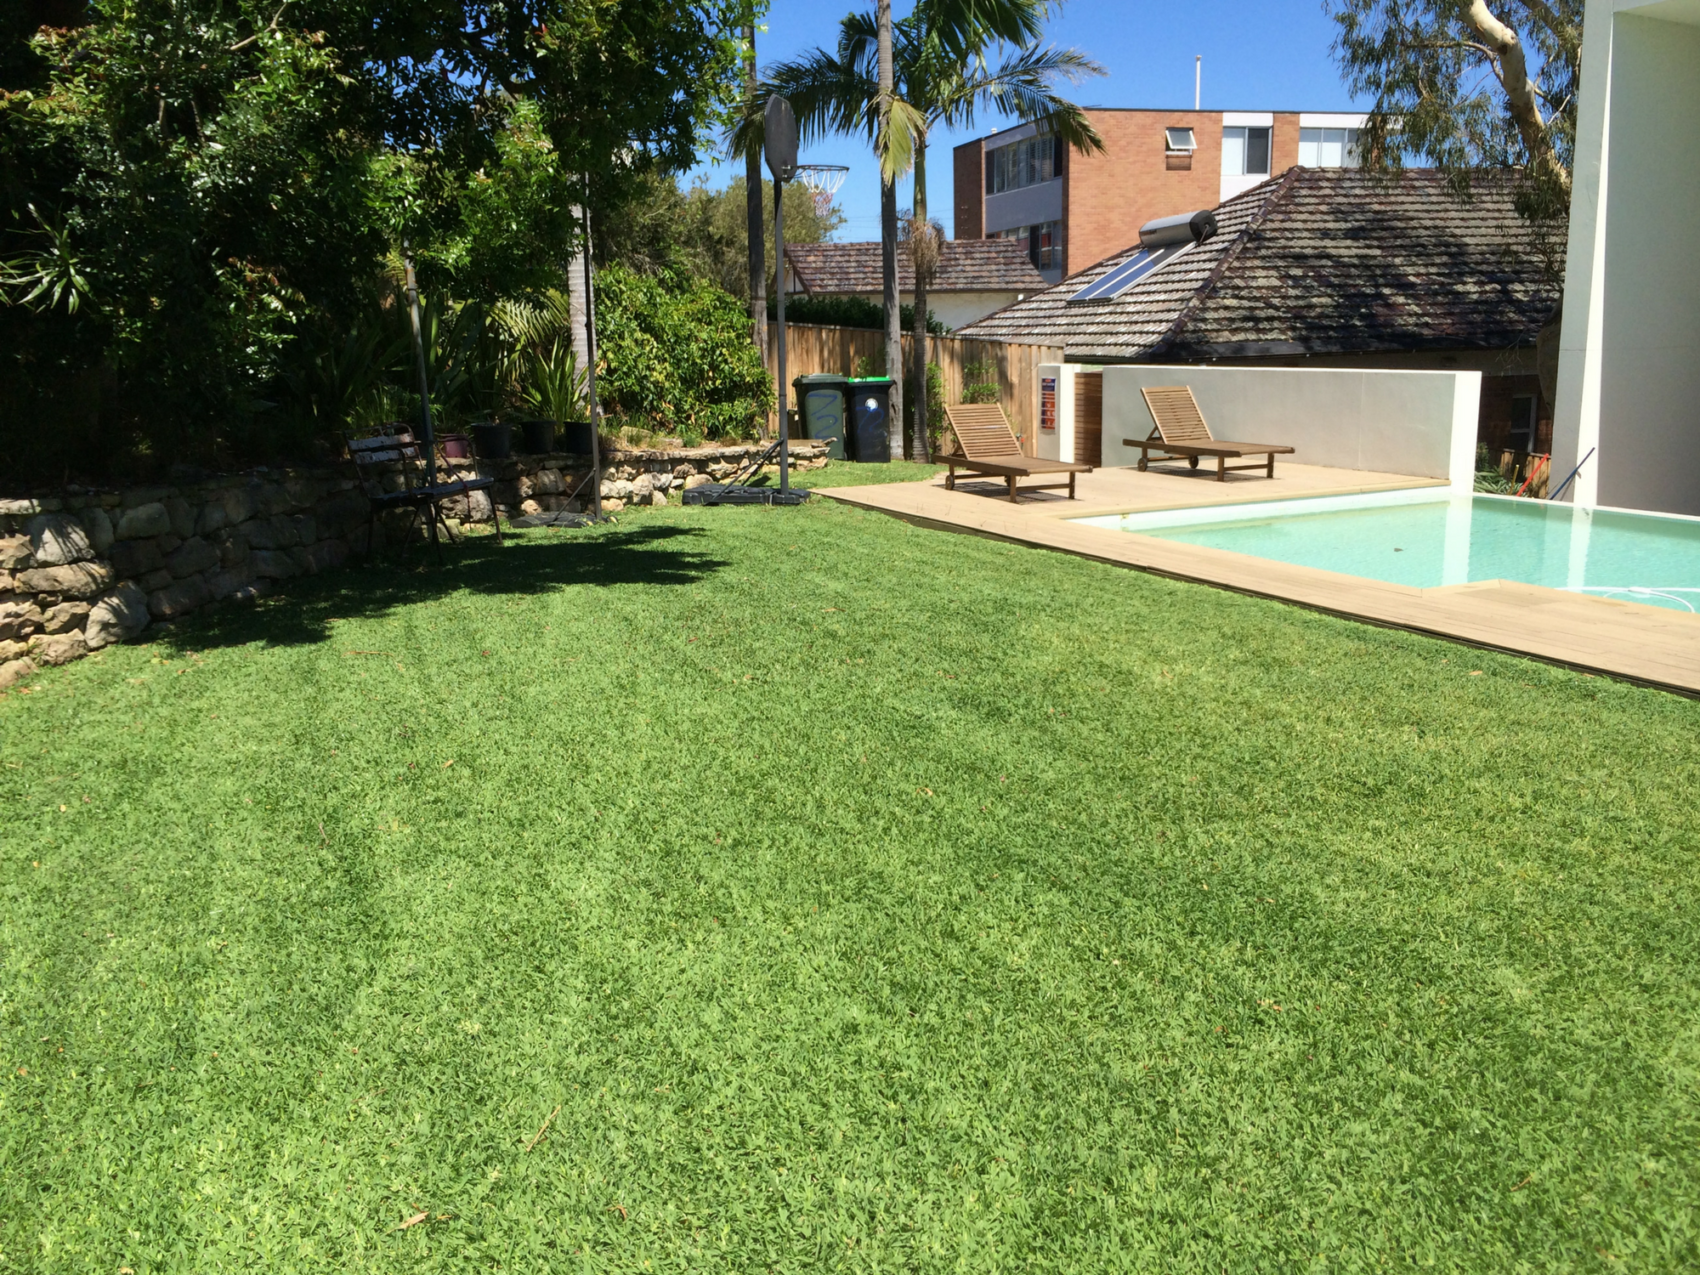 Lawn Mowing Service Northern Beaches Sydney Call PGS 0449 880369